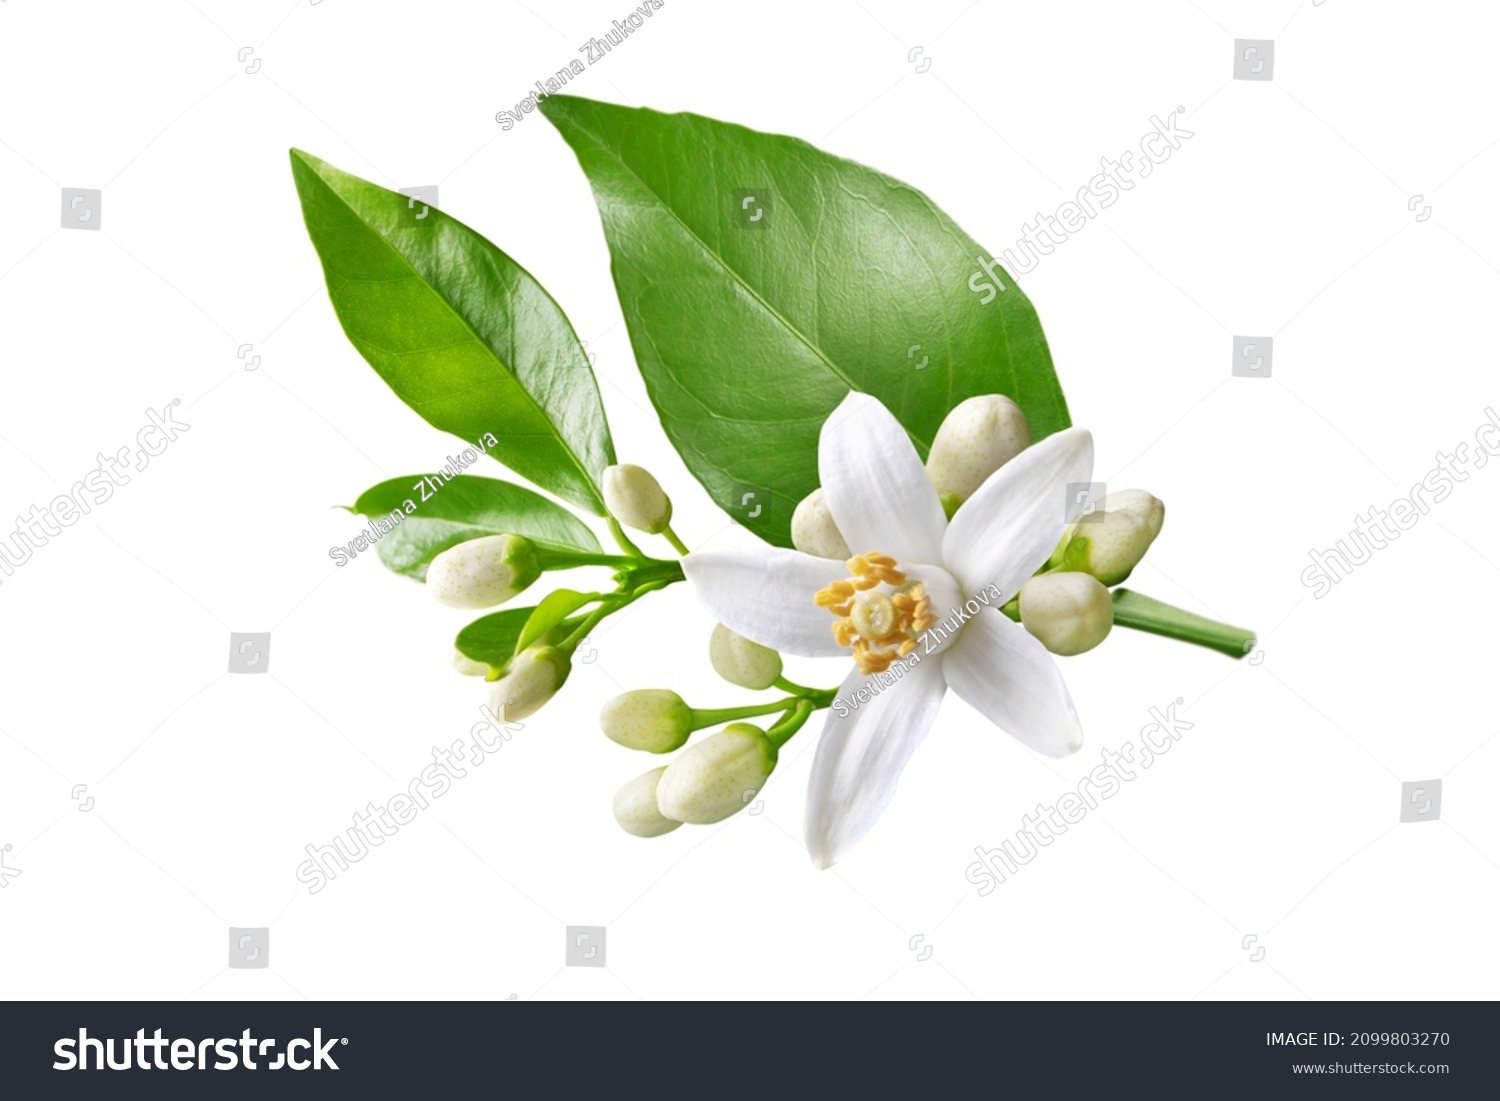 Orange tree branch with white flowers, buds and leaves isolated on white. Neroli blossom. Citrus bloom. #2099803270